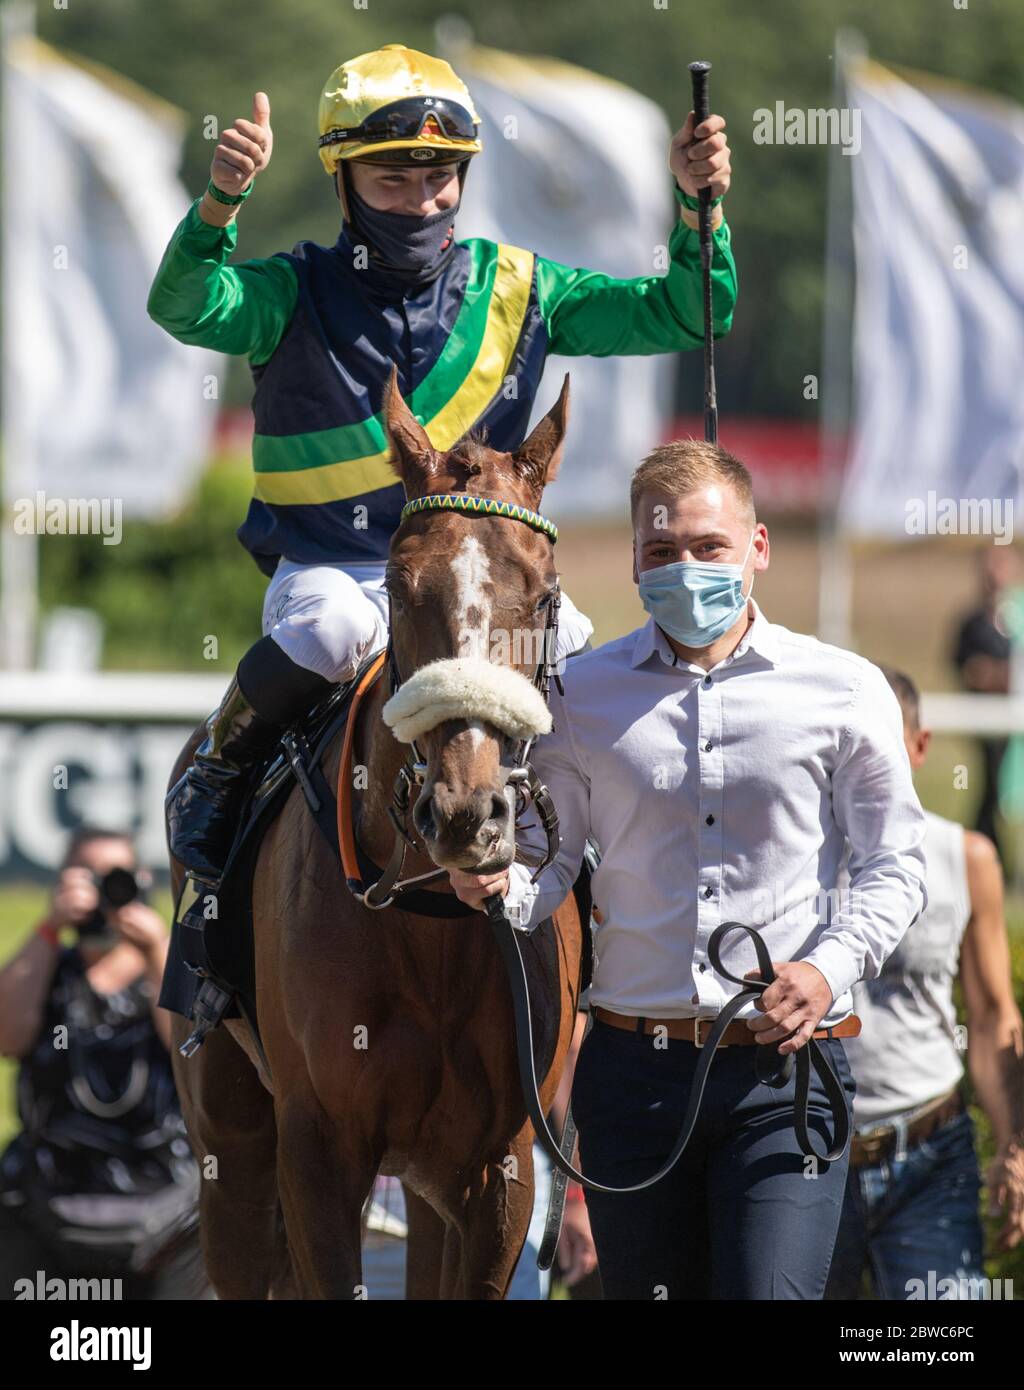 Hoppegarten, Germany. 31st May, 2020. Horse racing: Gallop, Hoppegarten Racetrack, second day of racing. Jockey Clement Lecoeuvre (l) wins on Kalifornia Queen from the stable Torjäger at Gestüt Röttgen Diana-Trial group race. Due to the coronavirus pandemic, the races are held without spectators. Credit: Andreas Gora/dpa/Alamy Live News Stock Photo